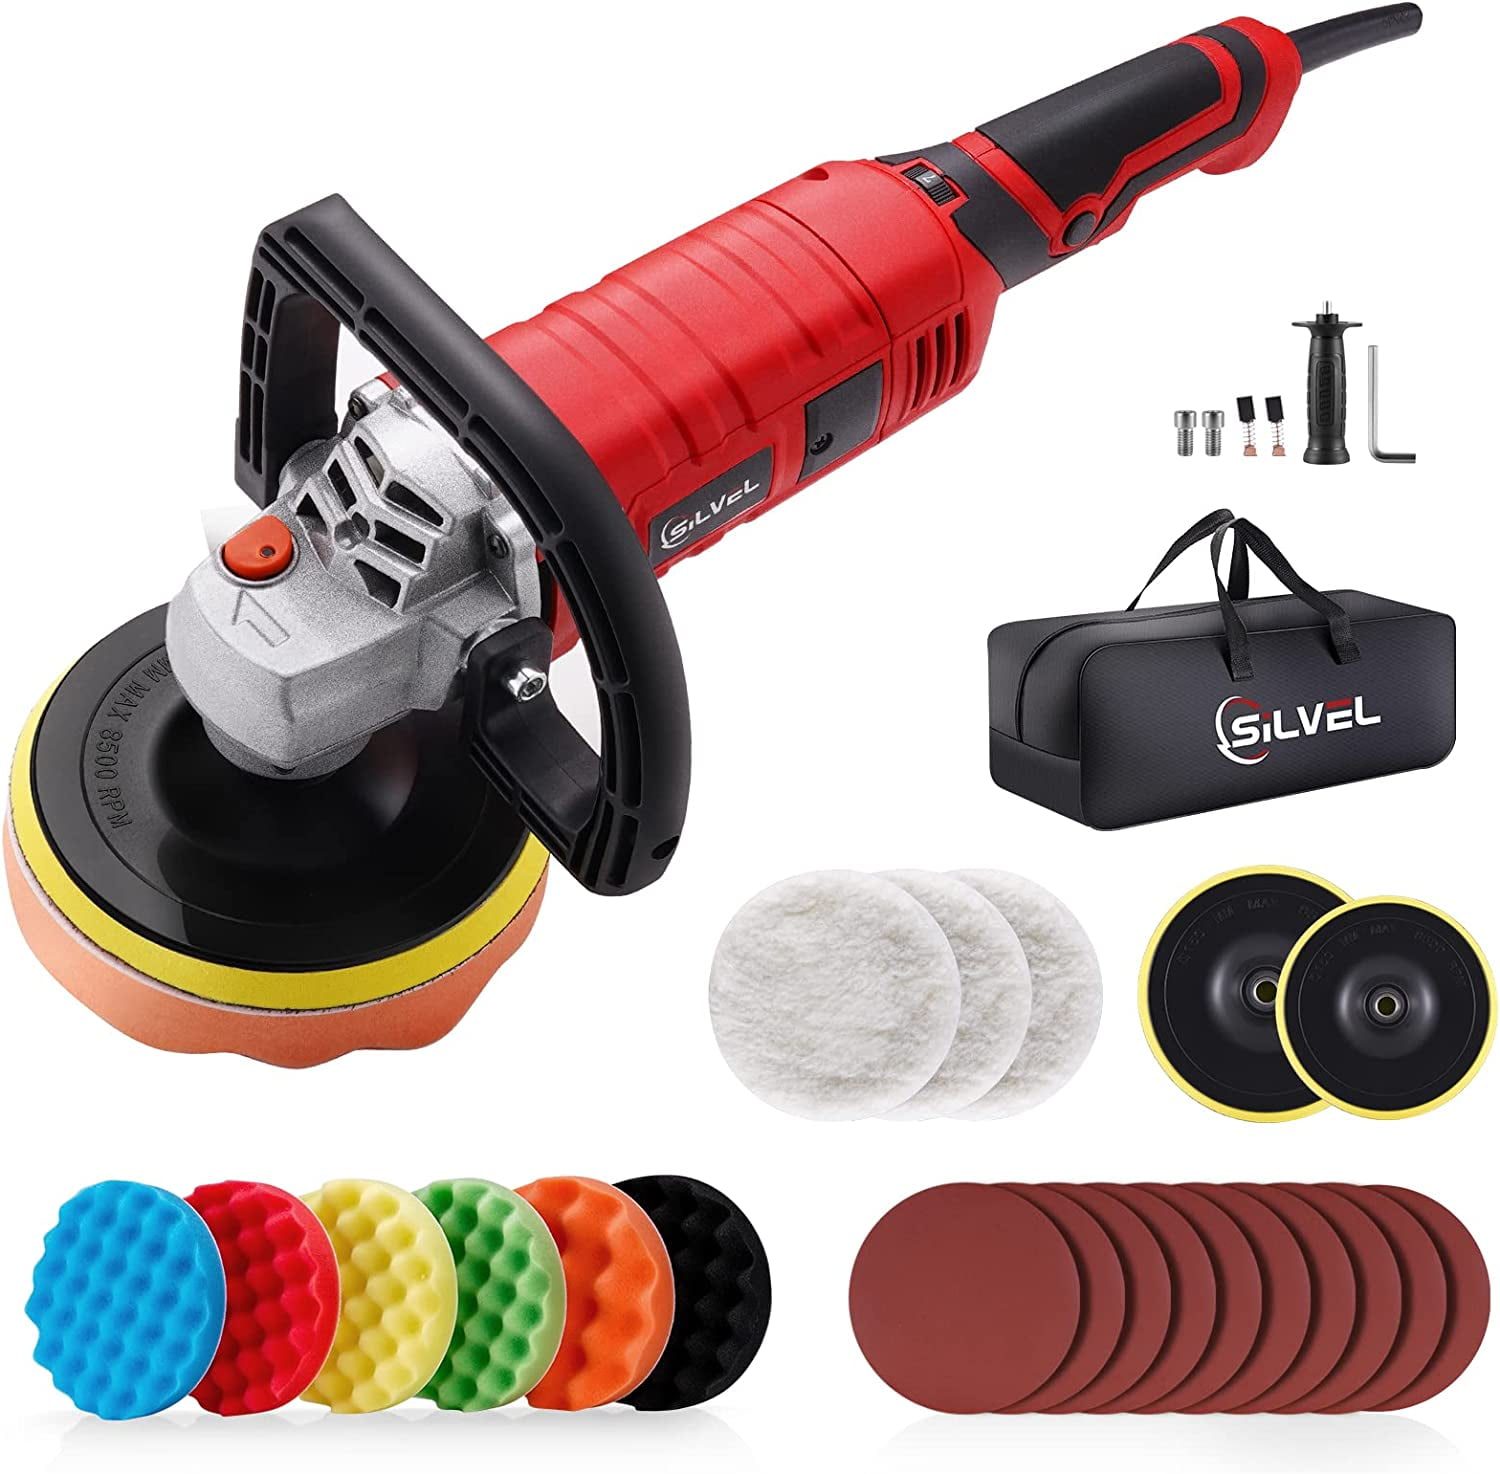 THINKWORK Buffer Polisher,10 Inch Car Polisher Sets with 4 Buffing and  Polishing Bonnets,6 Variable Speed 1500-3600 RPM,Double handle, Ideal for  Car